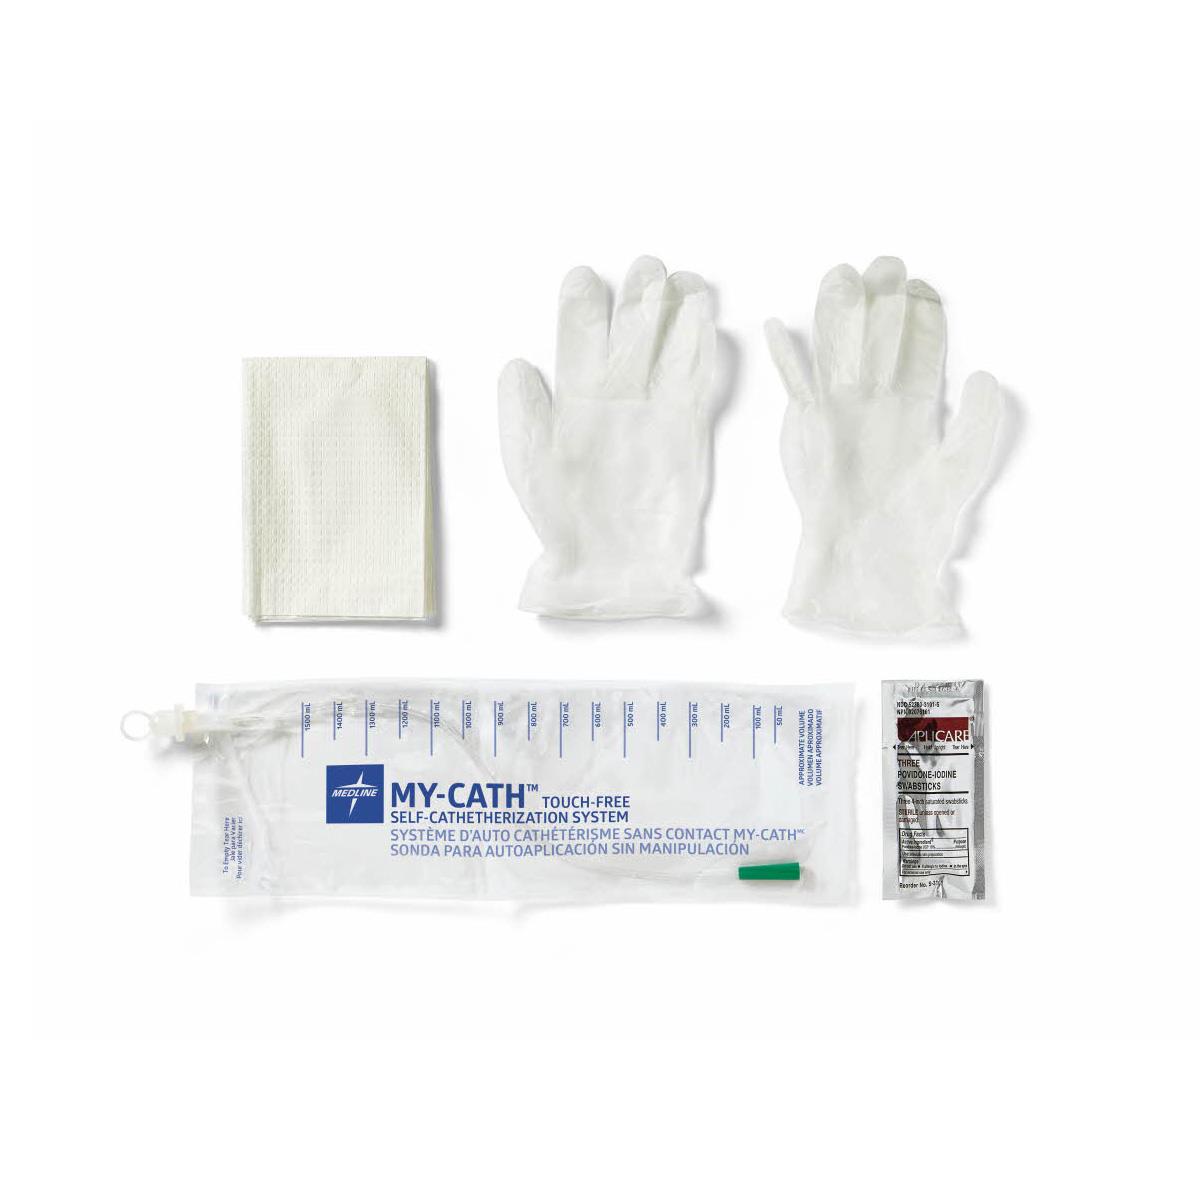 MY-CATH, Touch-free Self-Catheter System, 14FR Catheter w/ 1500ml Collection Bag